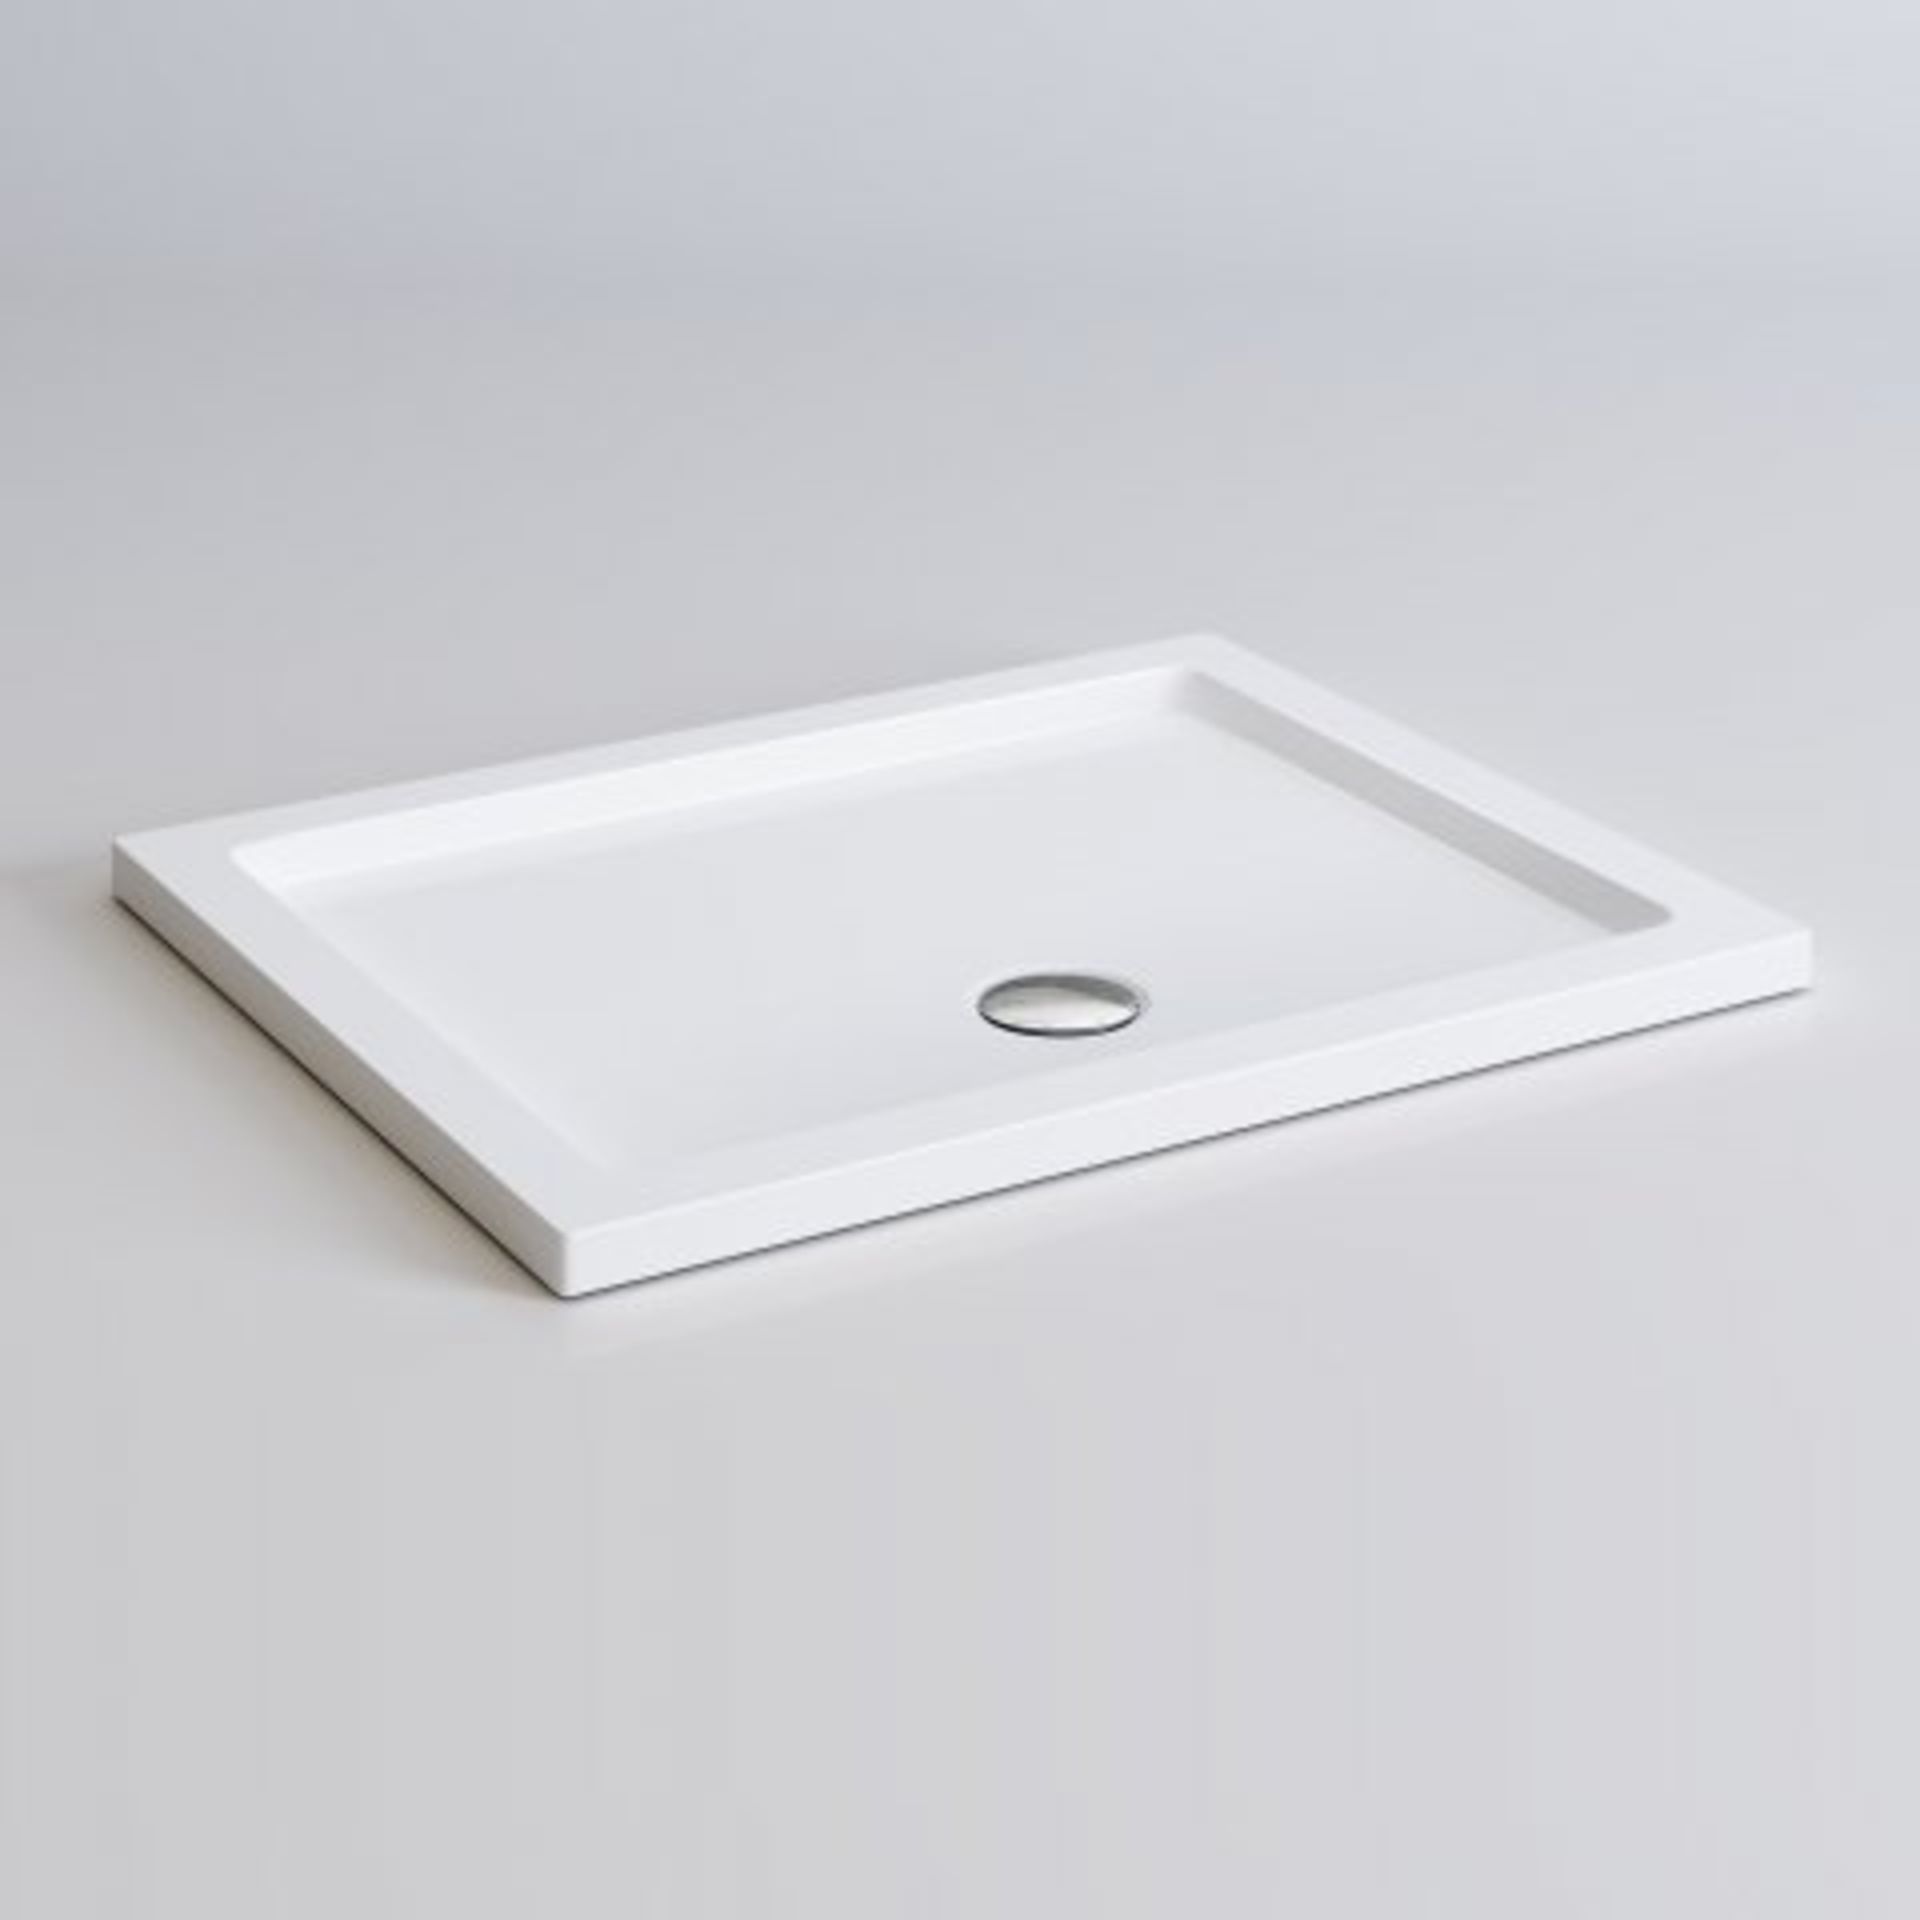 (K35) 1000x800mm Lightweight Square PU Shower Tray. RRP £124.99. Strong & Slimline low profile